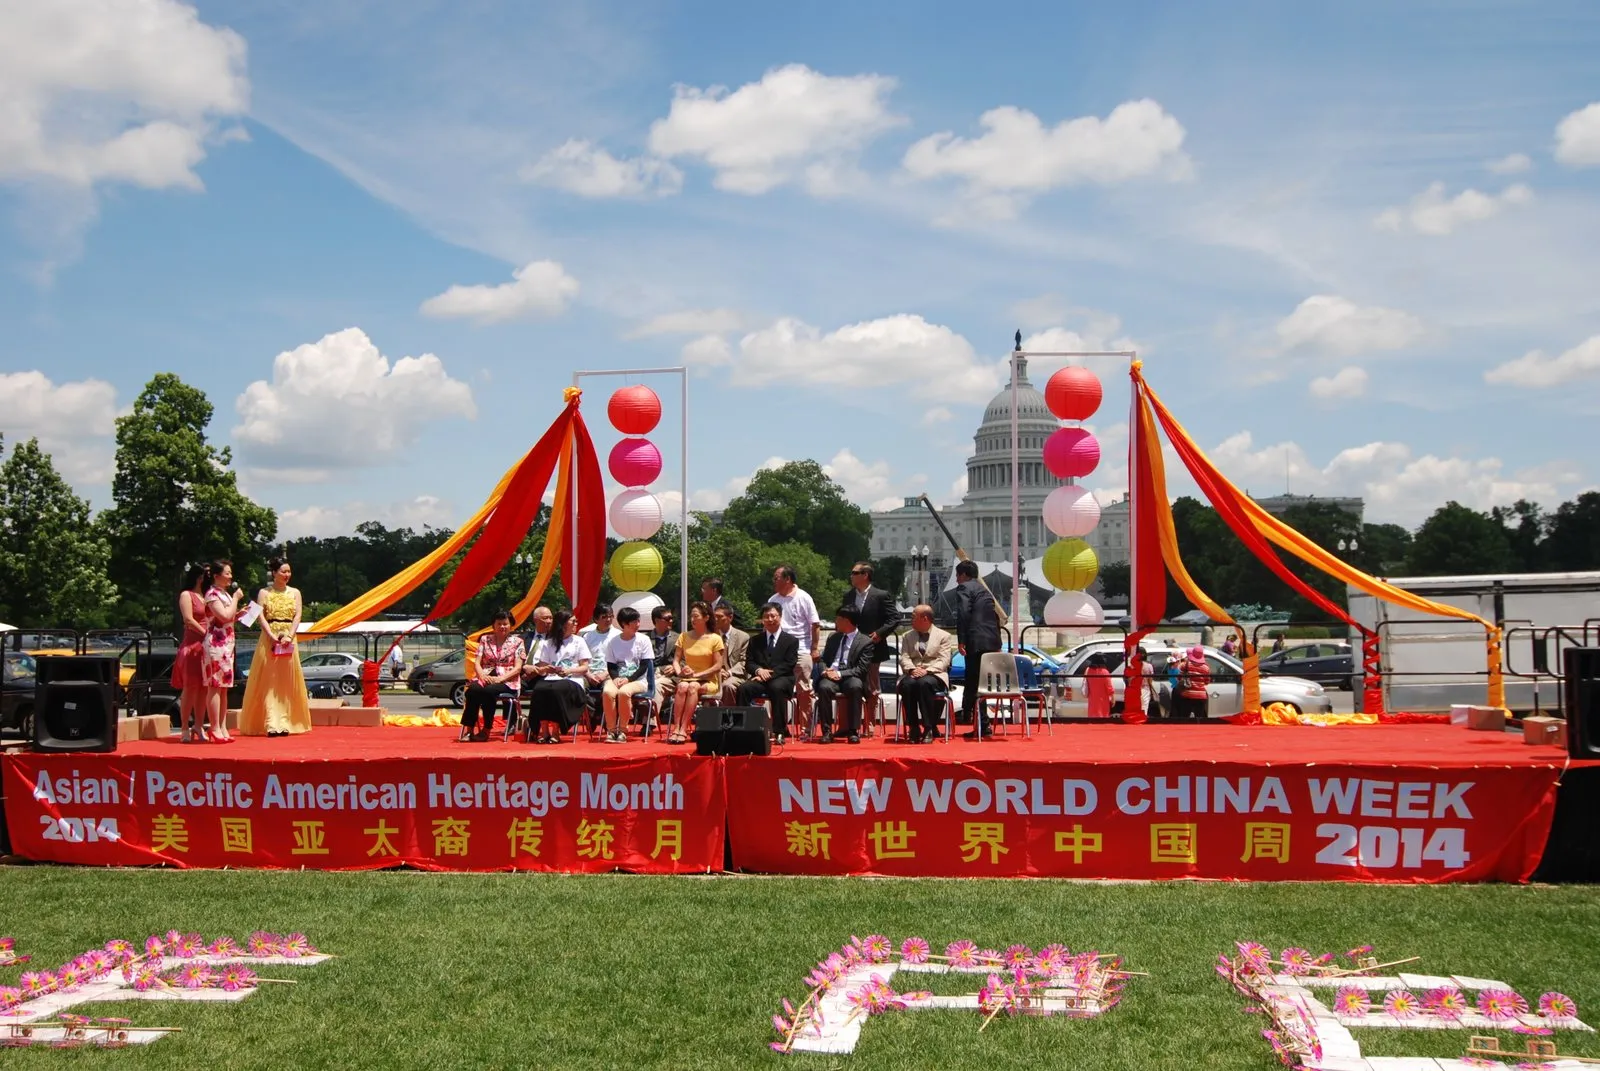 NWCL organises the “New World China Week”  campaign in Washington D.C., U.S.A., to promote intangible cultural heritage.